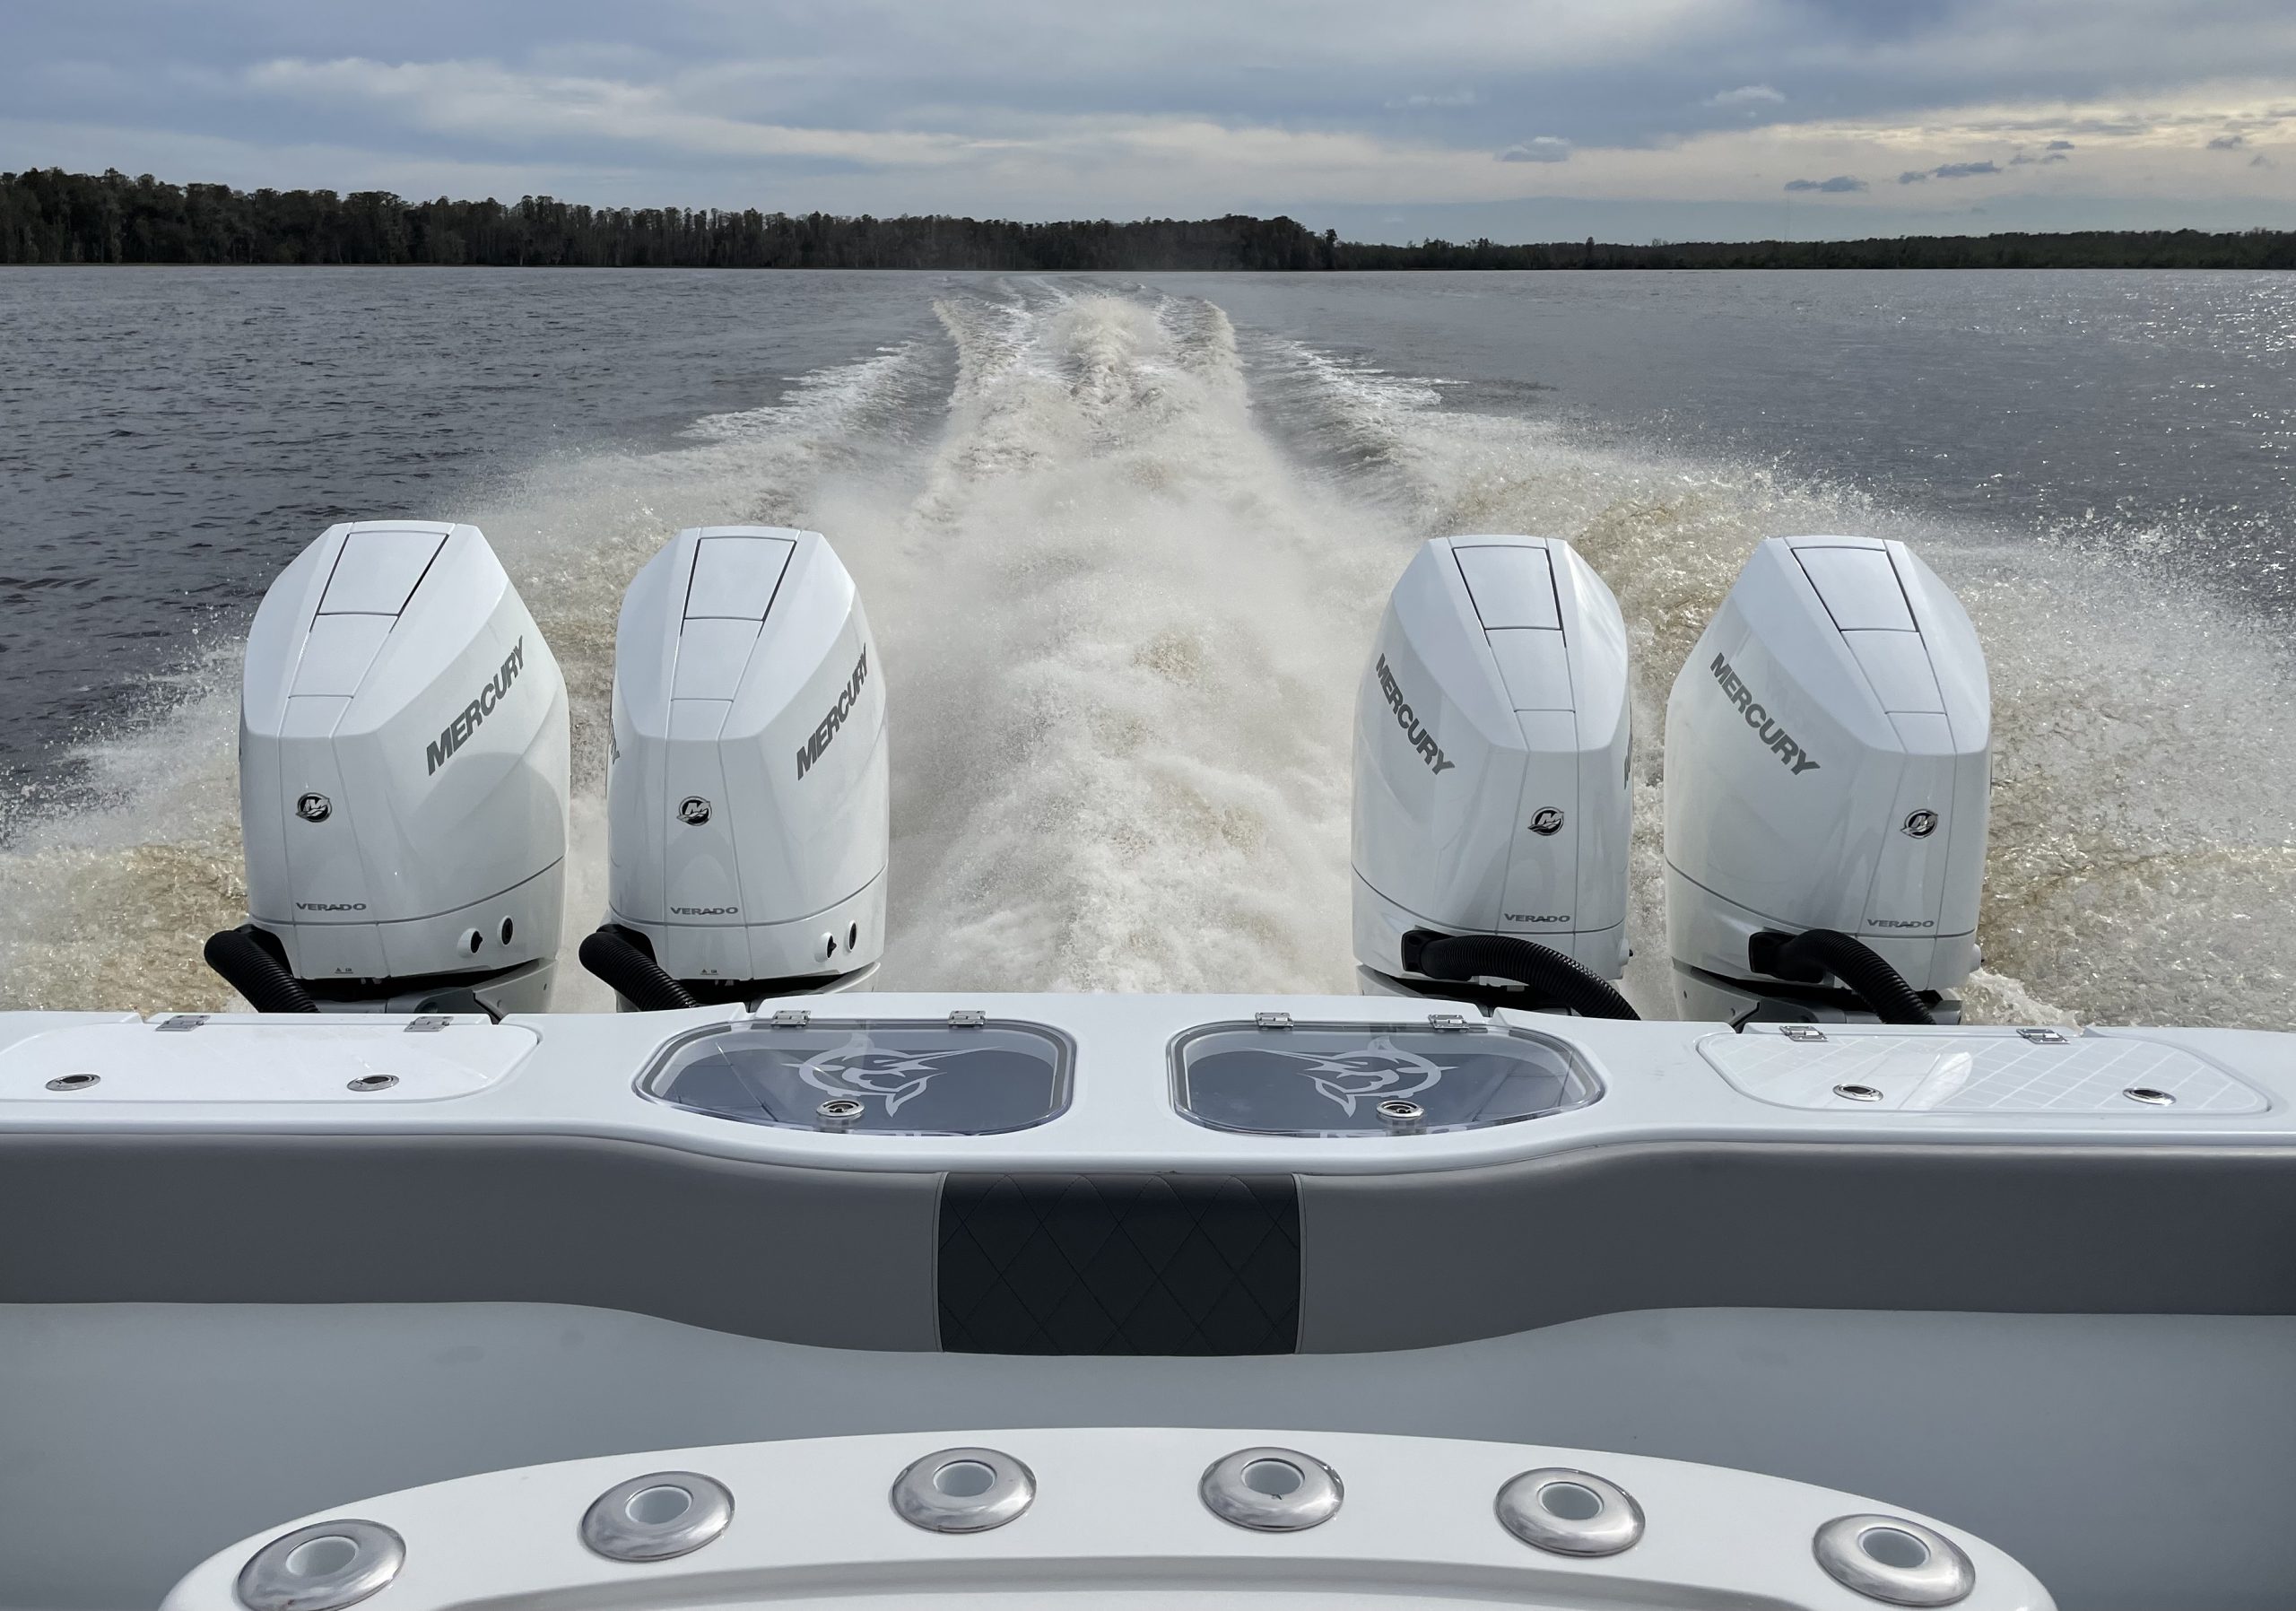 Mercury V10 Outboards Introduced - First Test Reviews